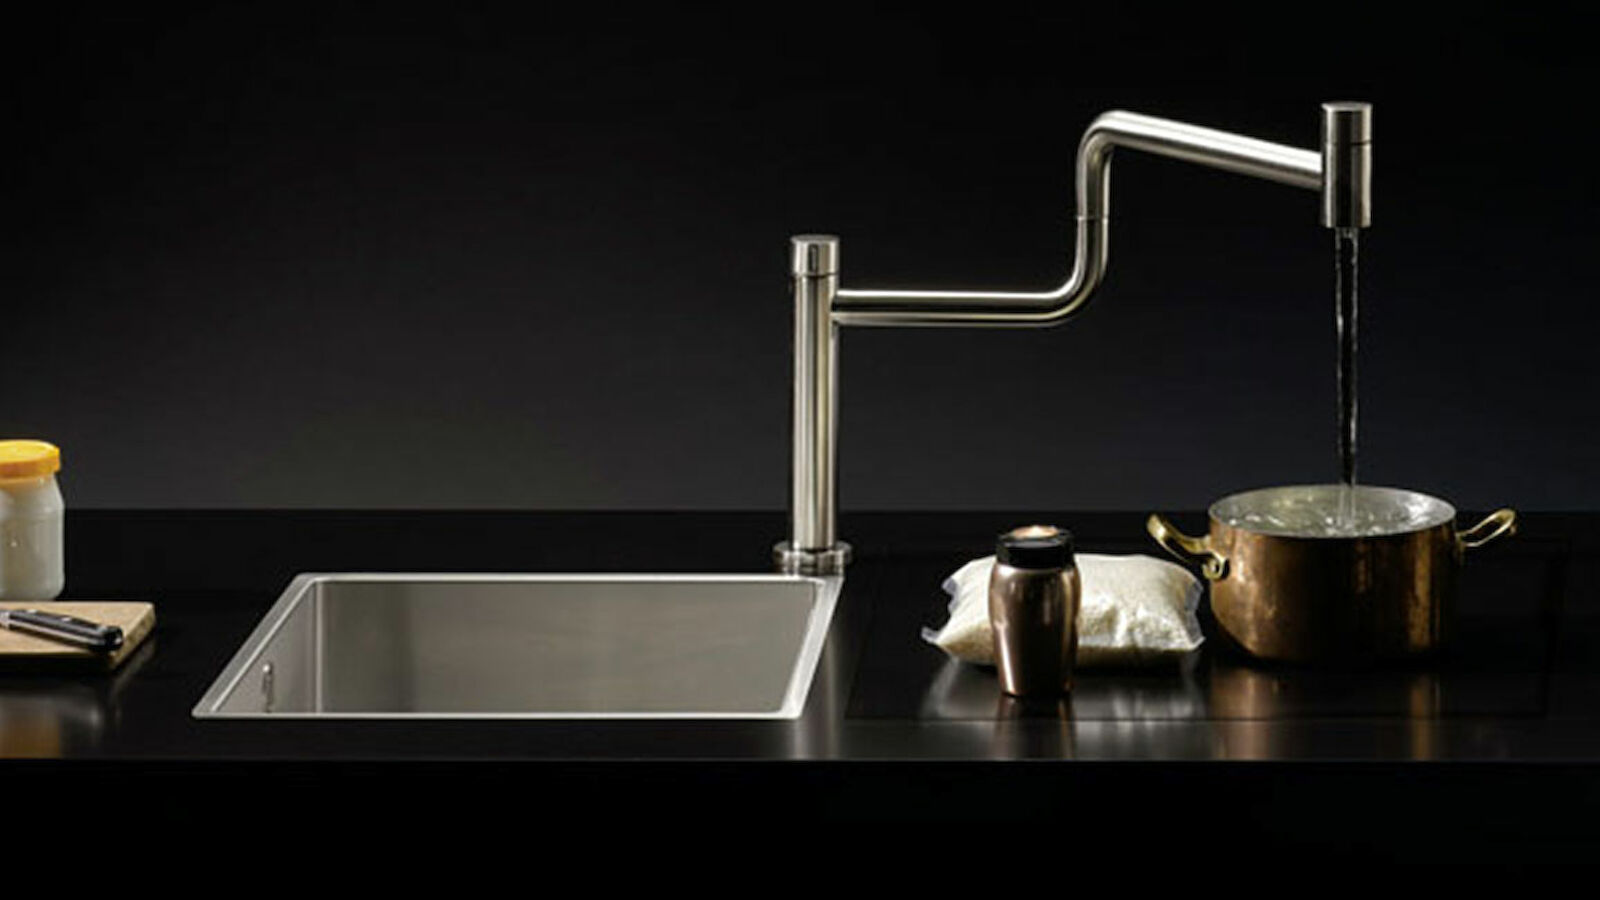 Process oriented concept for the kitchen – Water Zones from Dornbracht